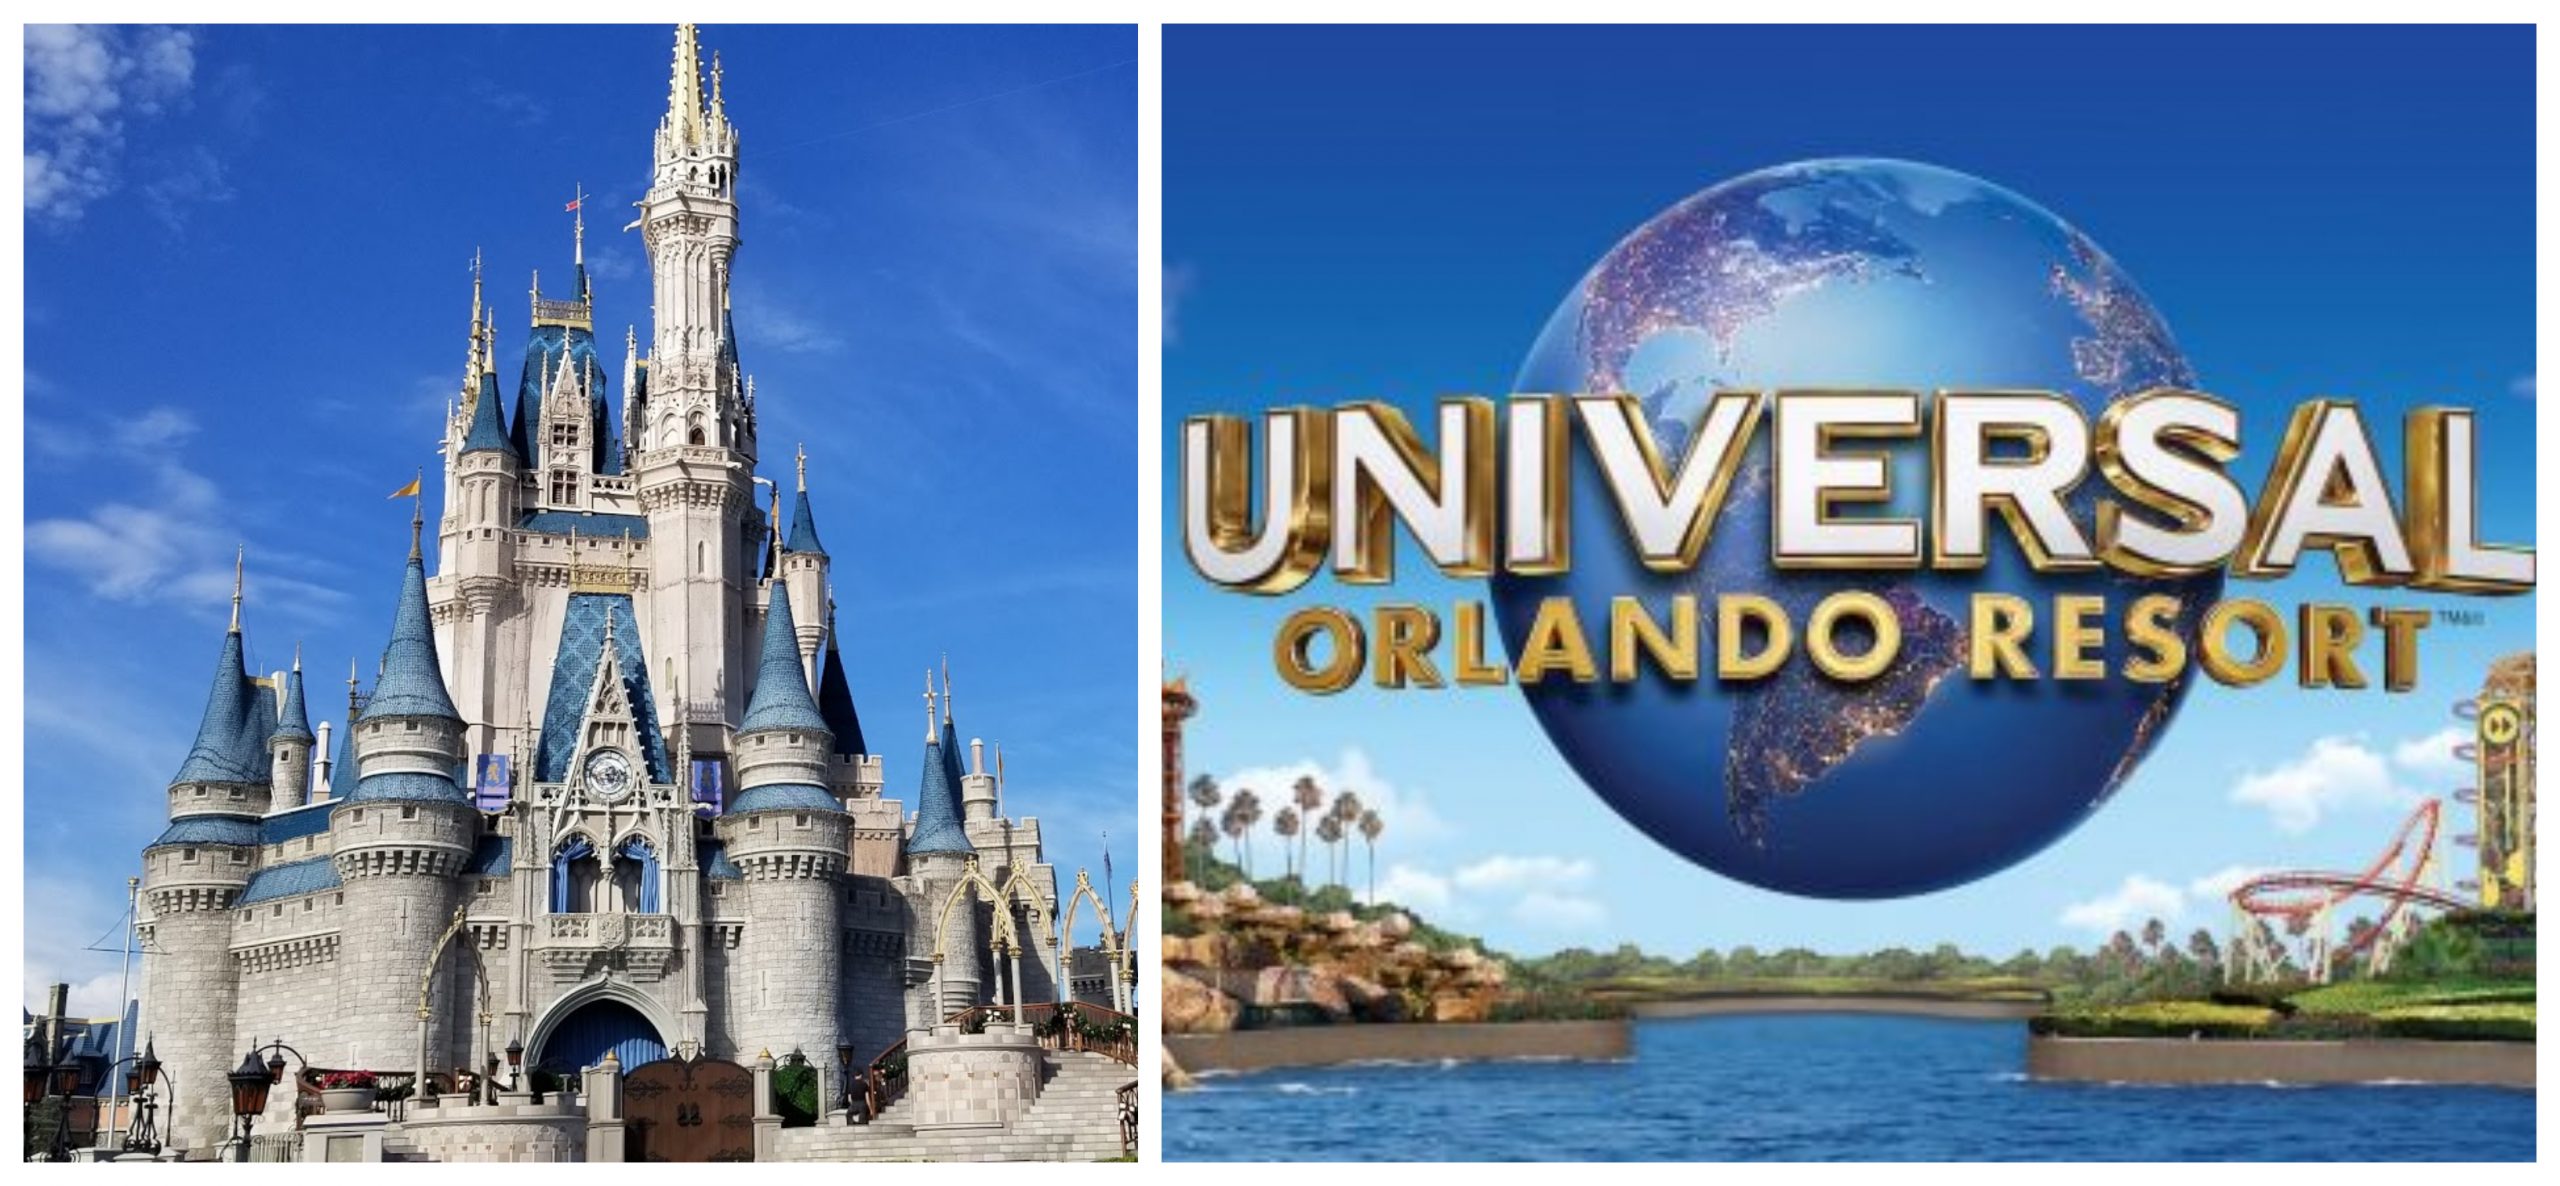 California man died from Coronavirus after traveling to Orlando and visiting Walt Disney World and Universal Studios Florida